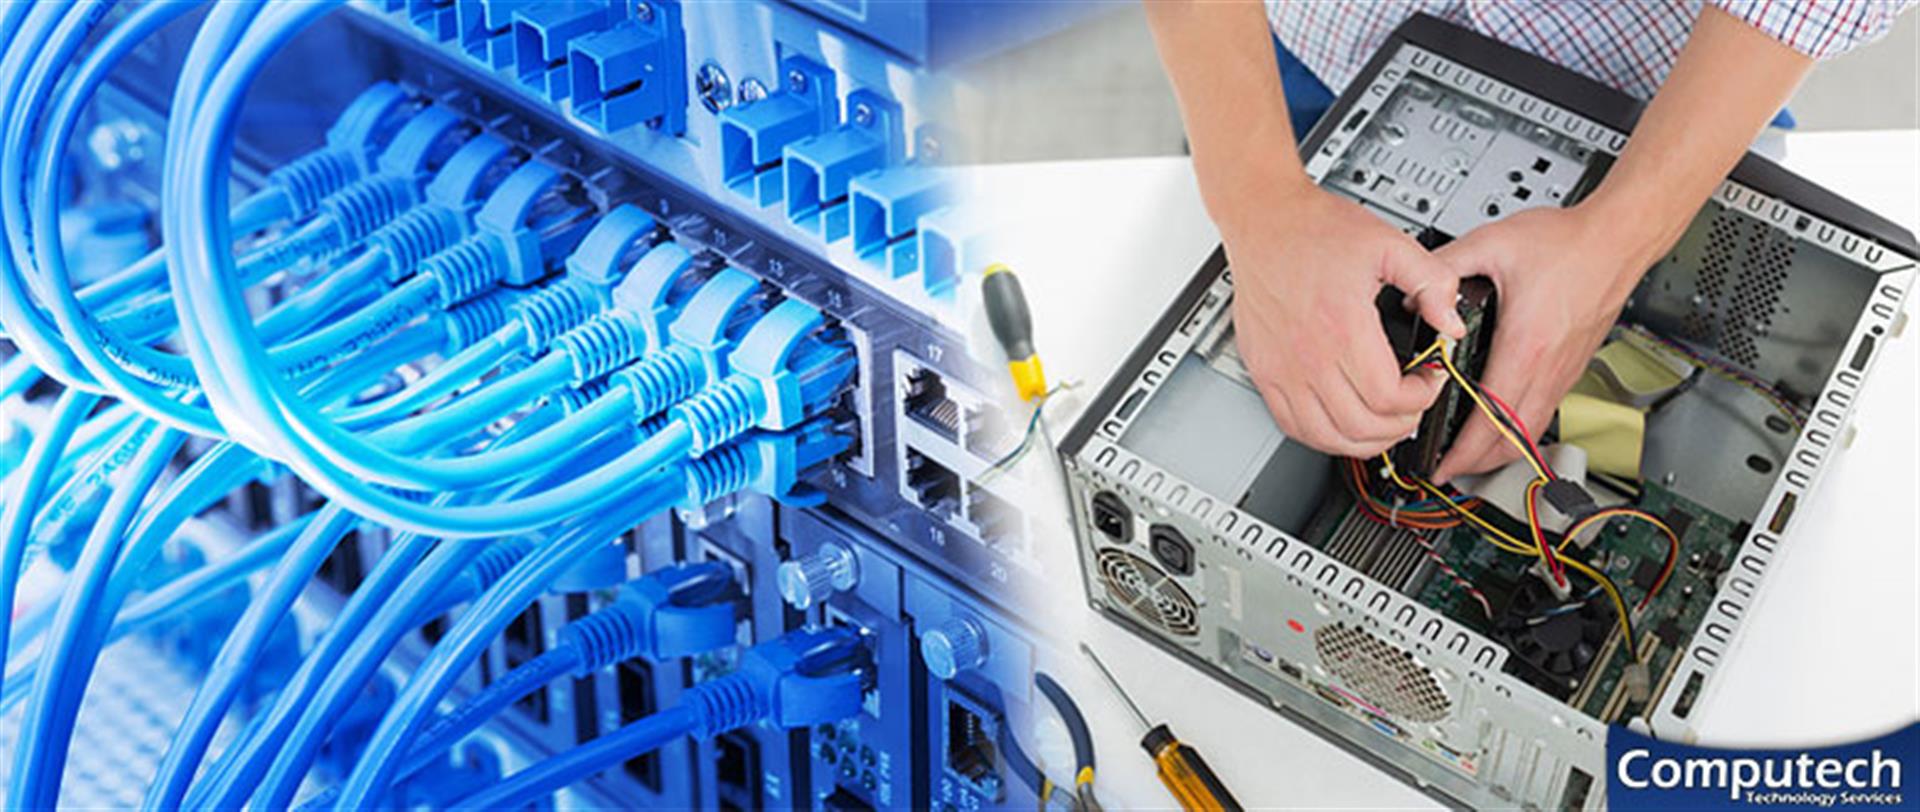 Yuma Arizona On-Site PC & Printer Repairs, Network, Telecom and Data Low Voltage Cabling Services